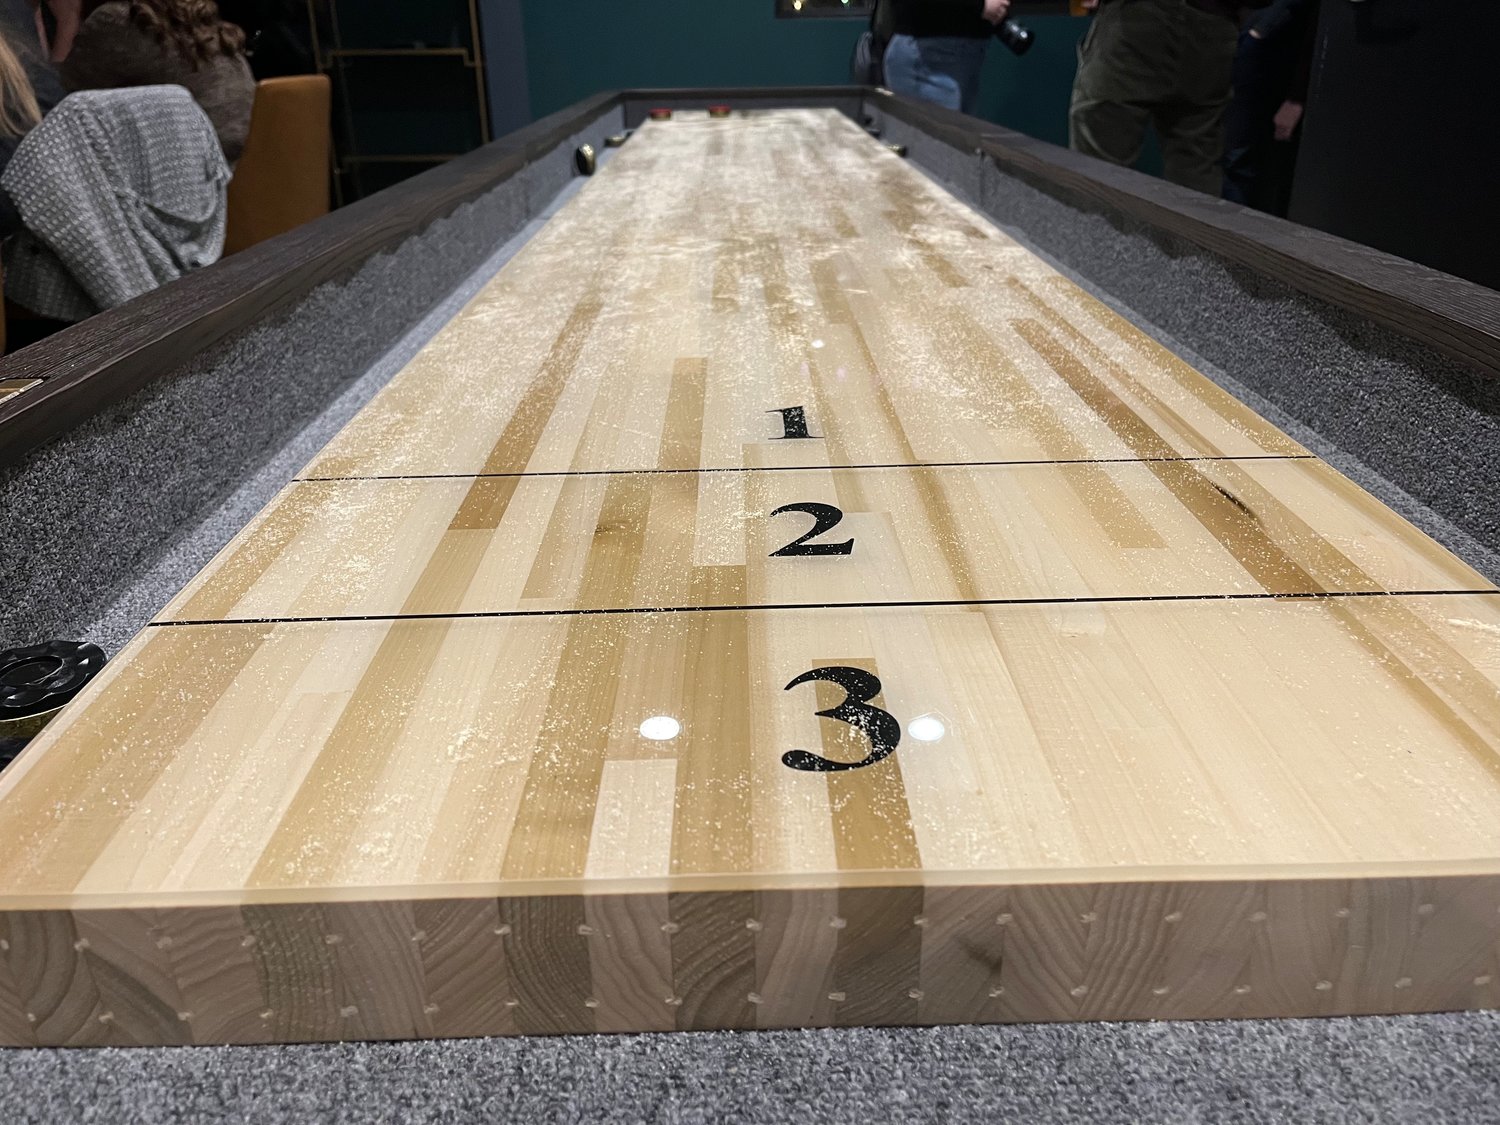 The Boardroom, the Shuffle’s private event lounge, comes with its own tabletop version of shuffleboard.